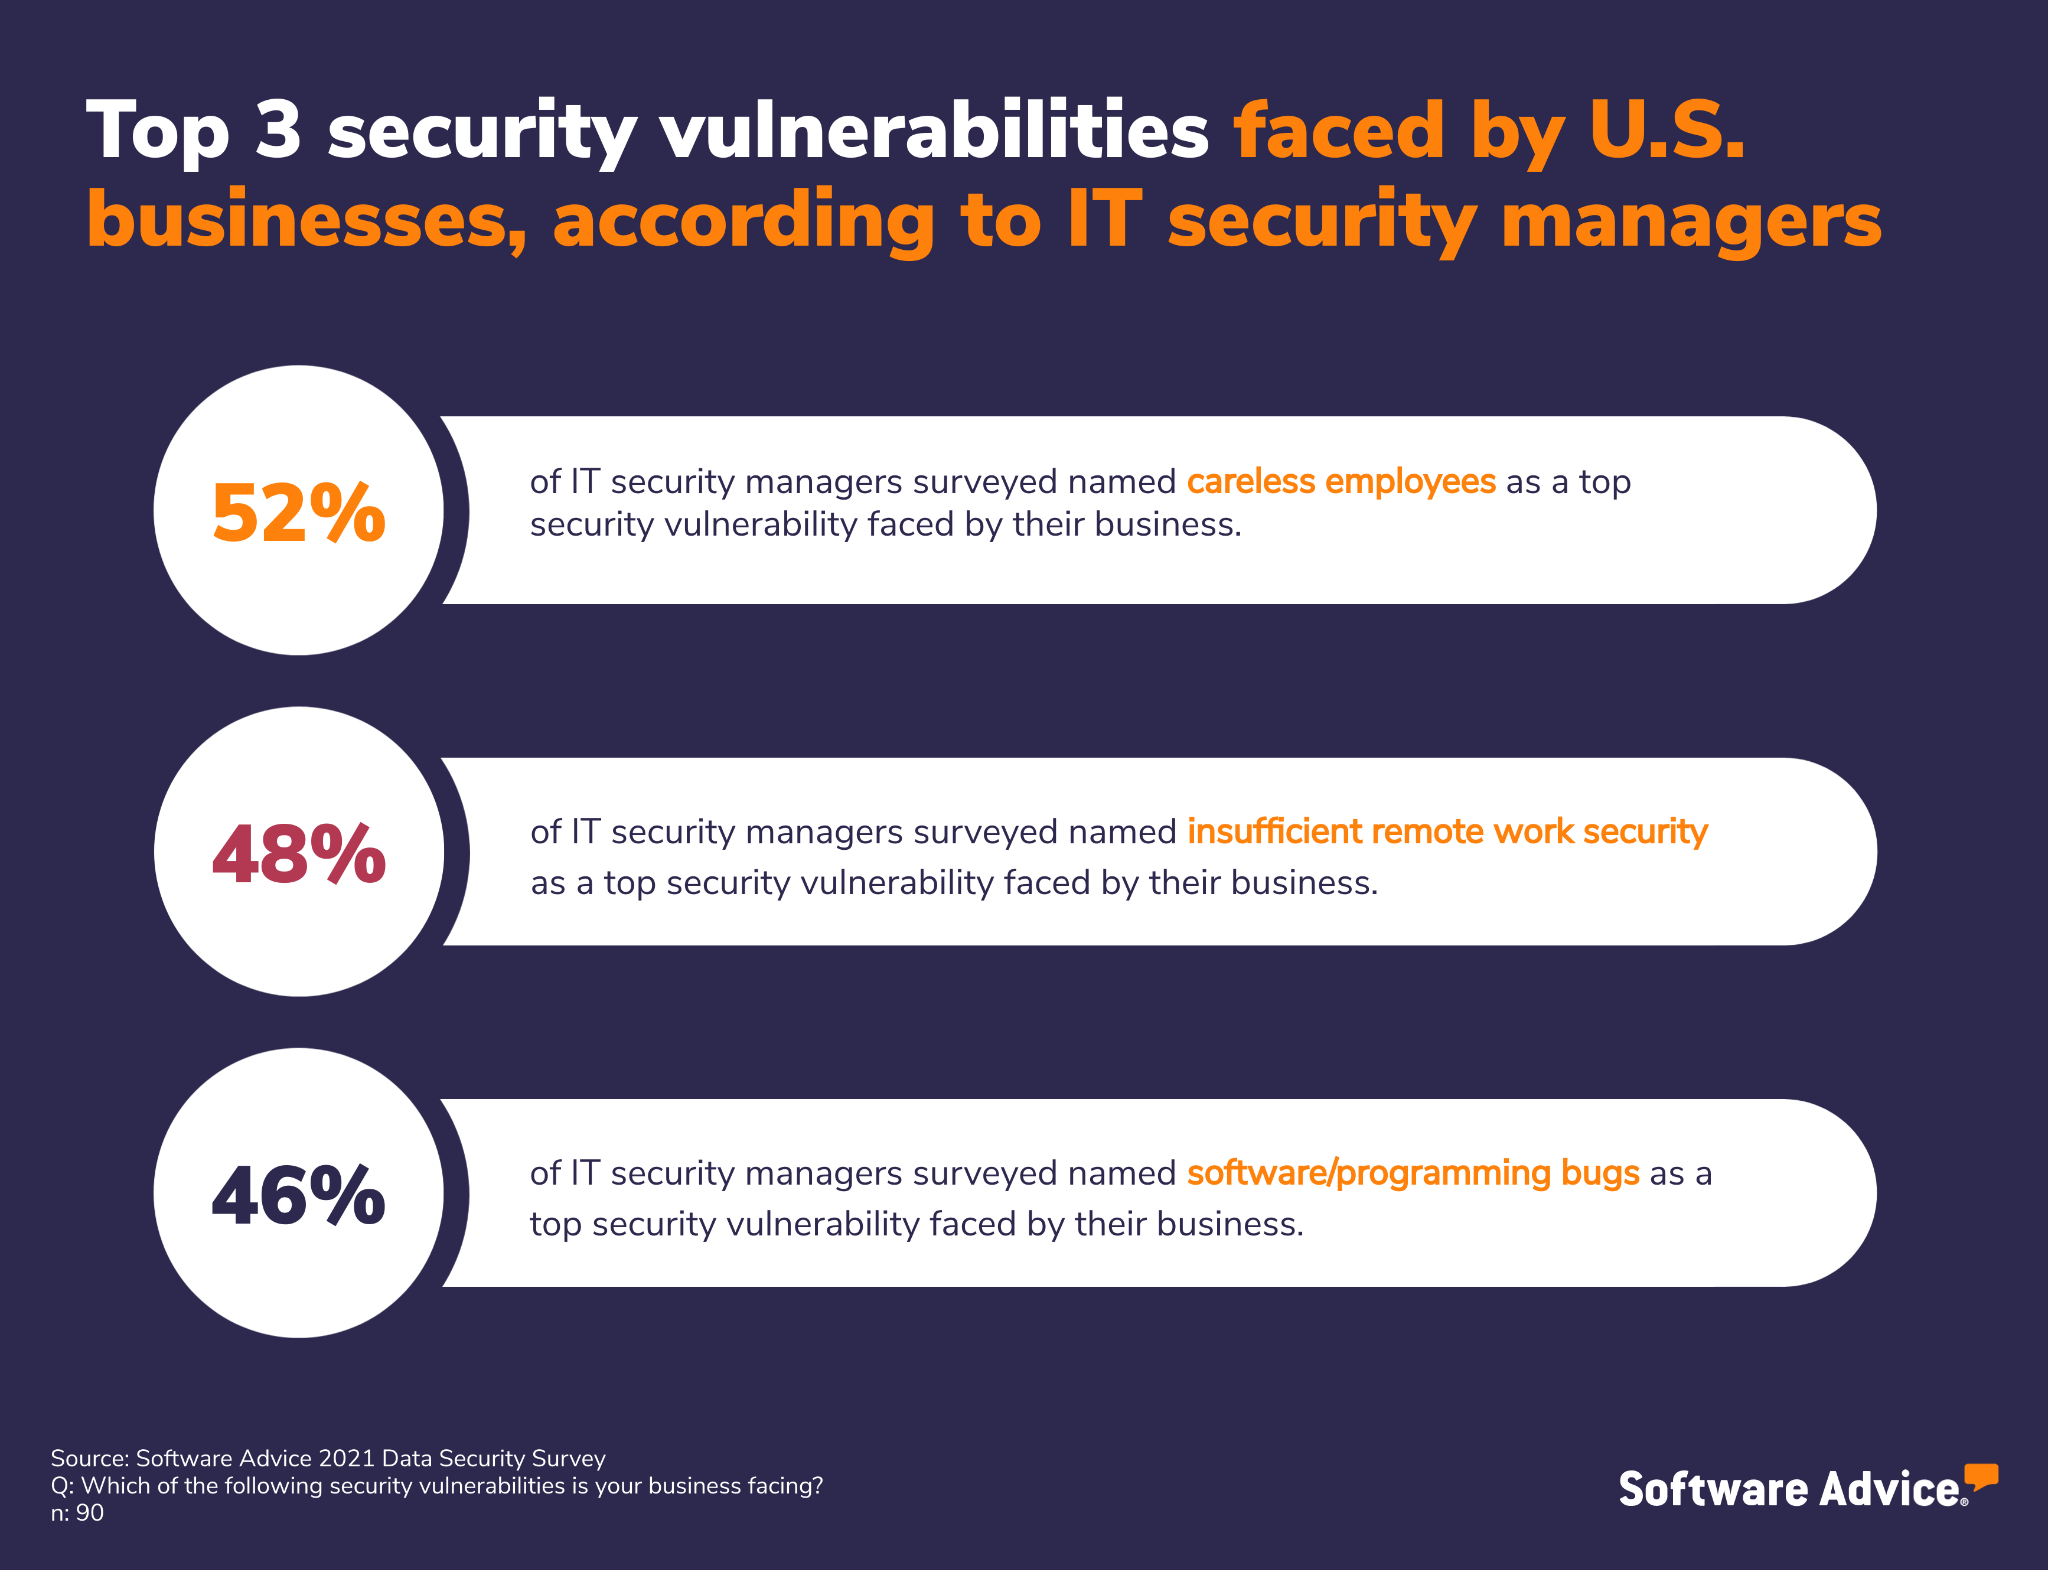 Top 3 security vulnerabilities faced by U.S. businesses, according to IT security managers